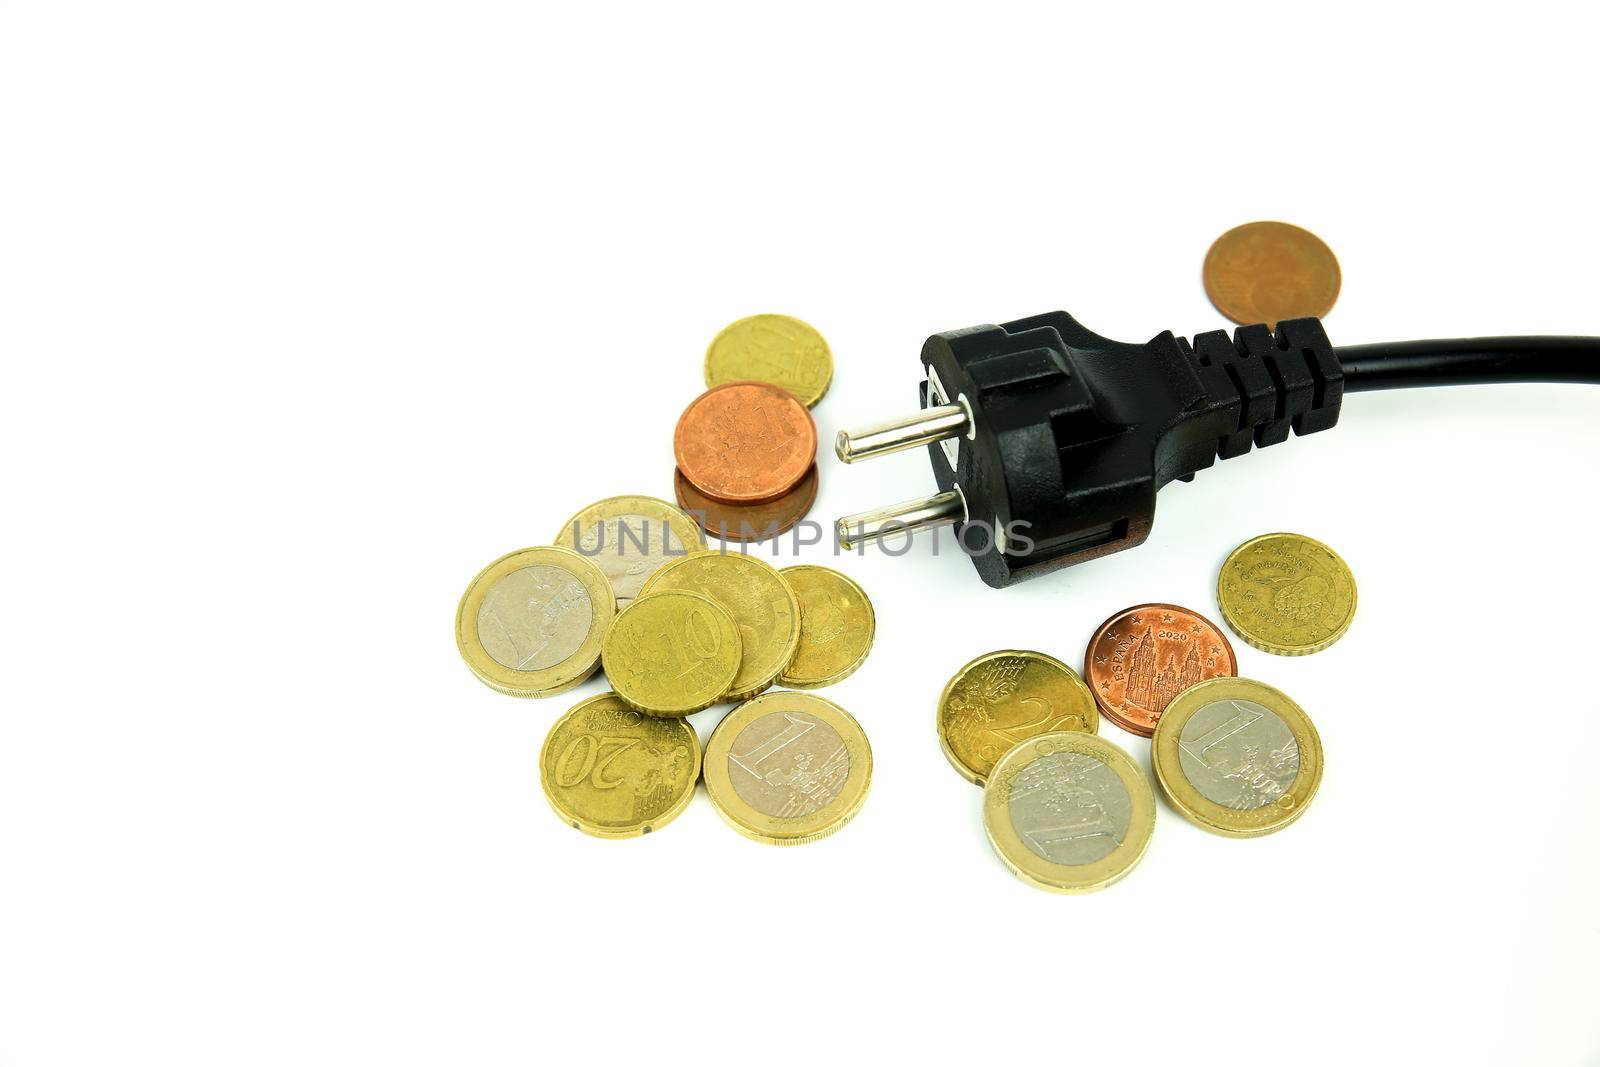 Pin power plug and coins on white background by soniabonet